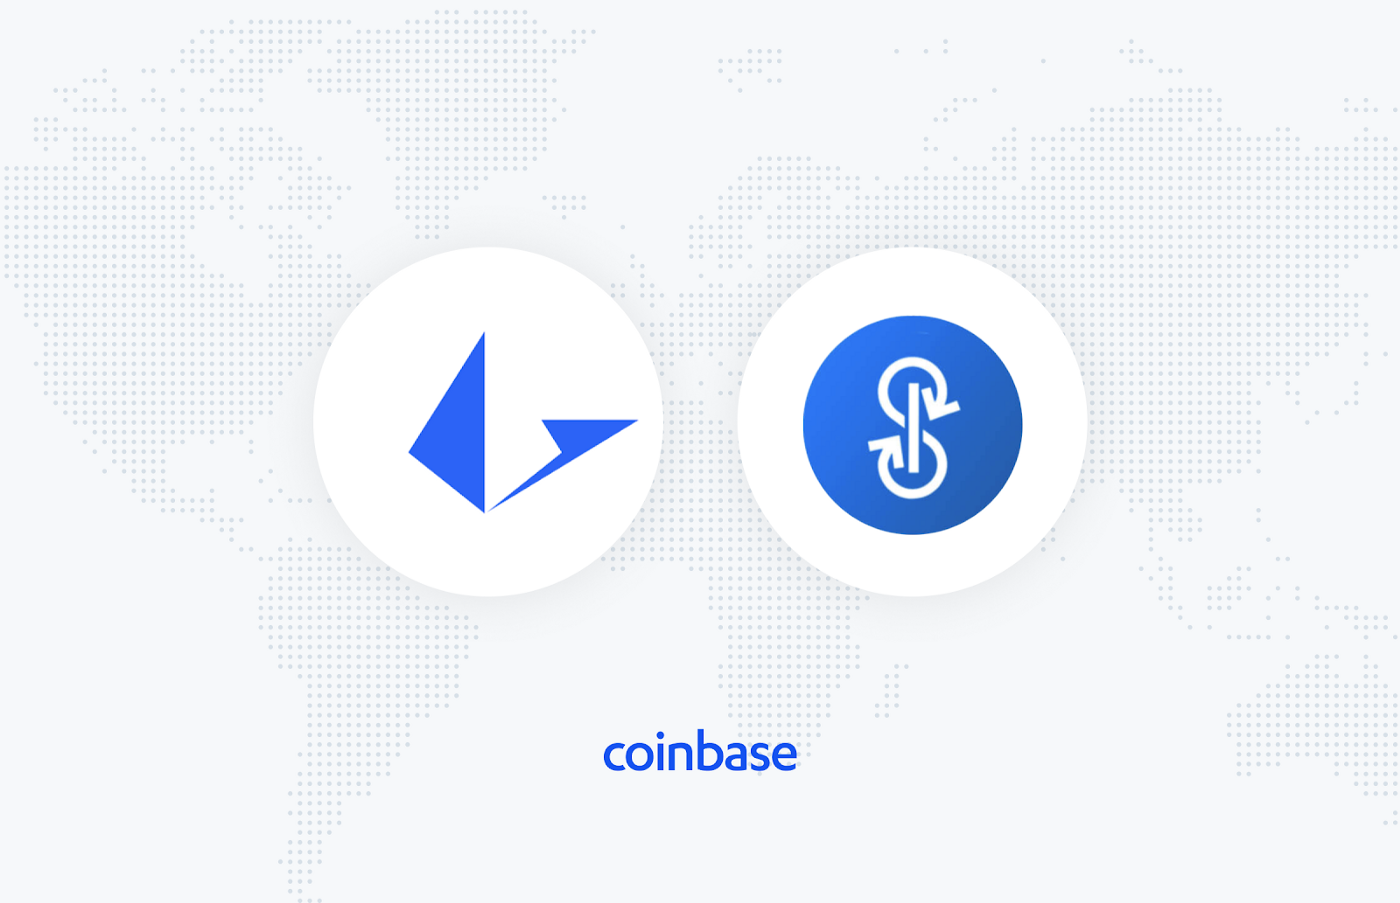 LRC gets a taste of the 'Coinbase Effect' - Santiment Community Insights